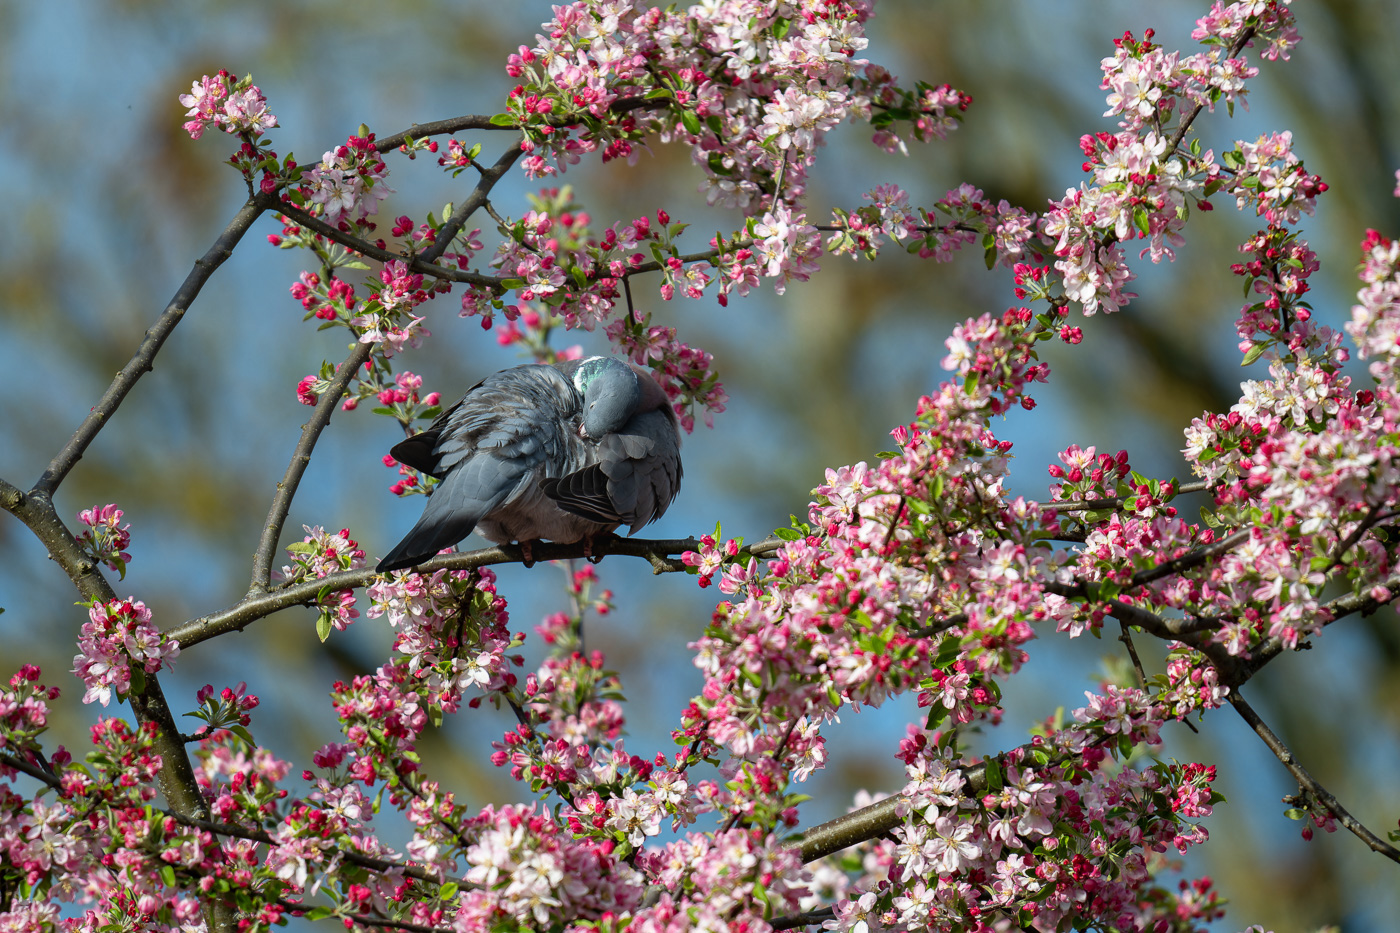 Wood pigeon in blossom captured with Z 180-600mm f/5.6-6.3 VR at 600mm. Camera settings 1/2000 sec. f/6.3 ISO 500